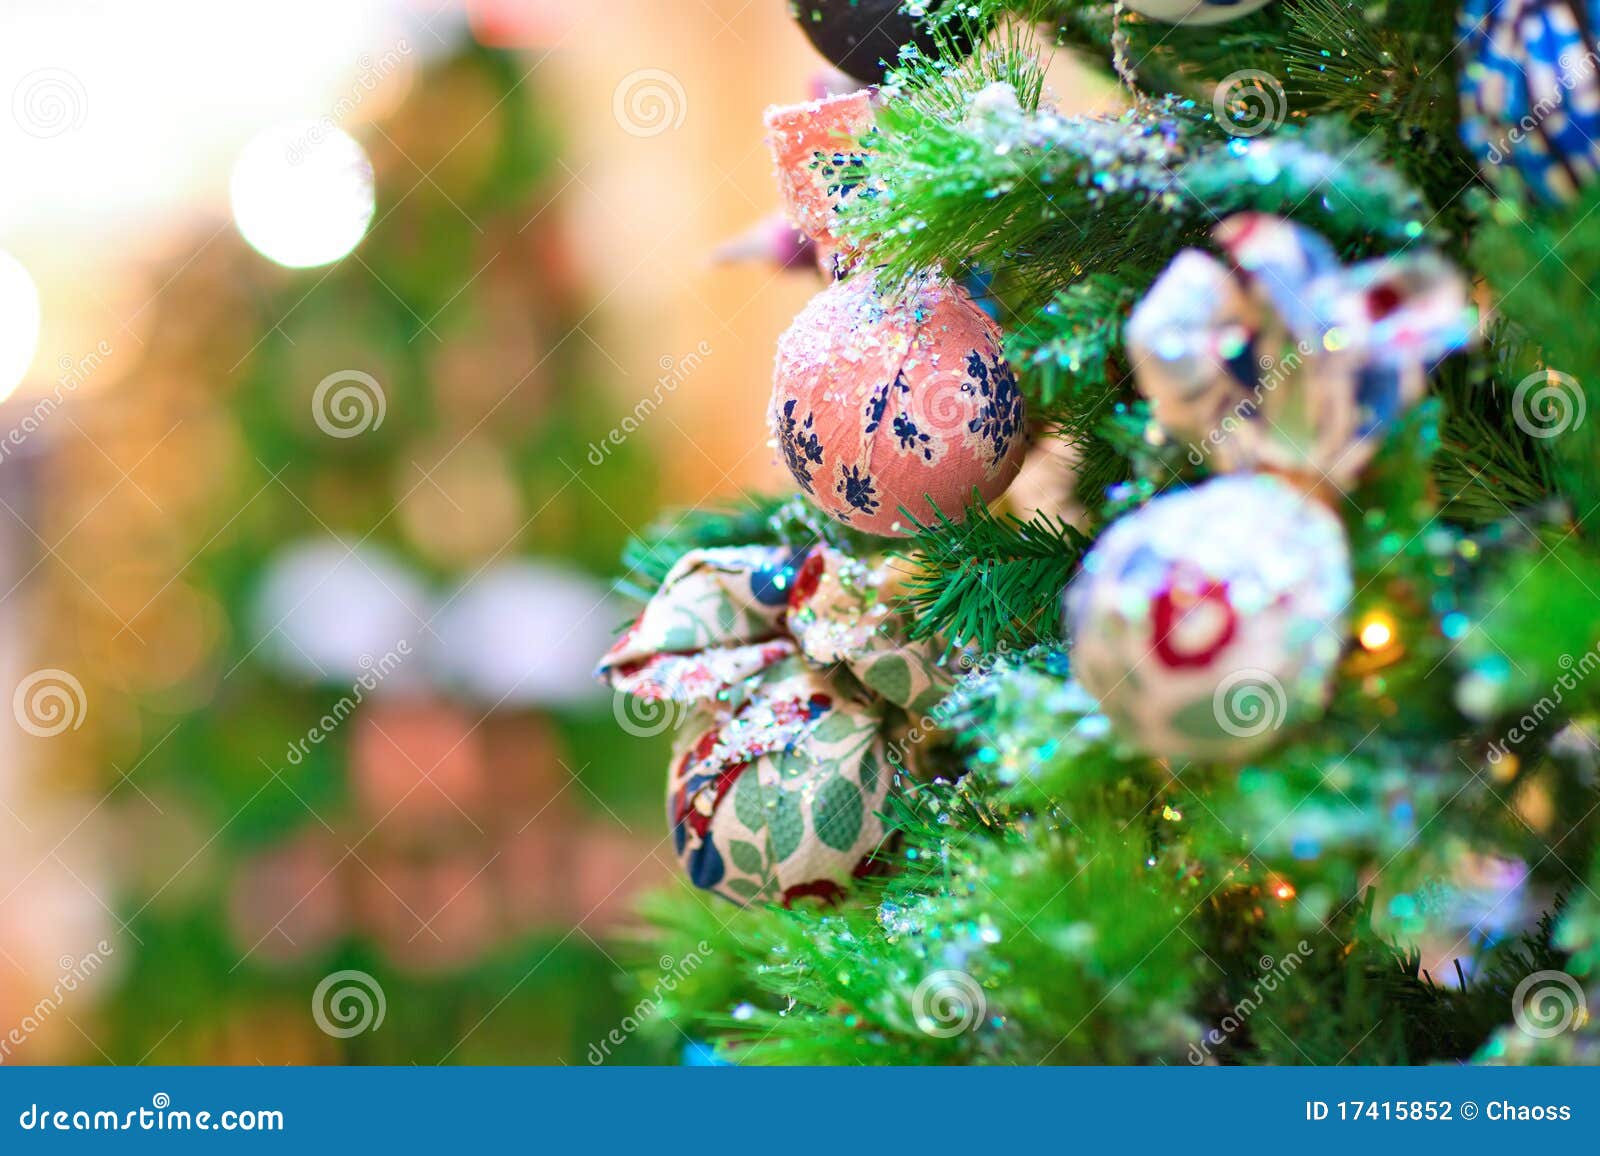 Background with Decorated New Year Tree Stock Photo - Image of green ...